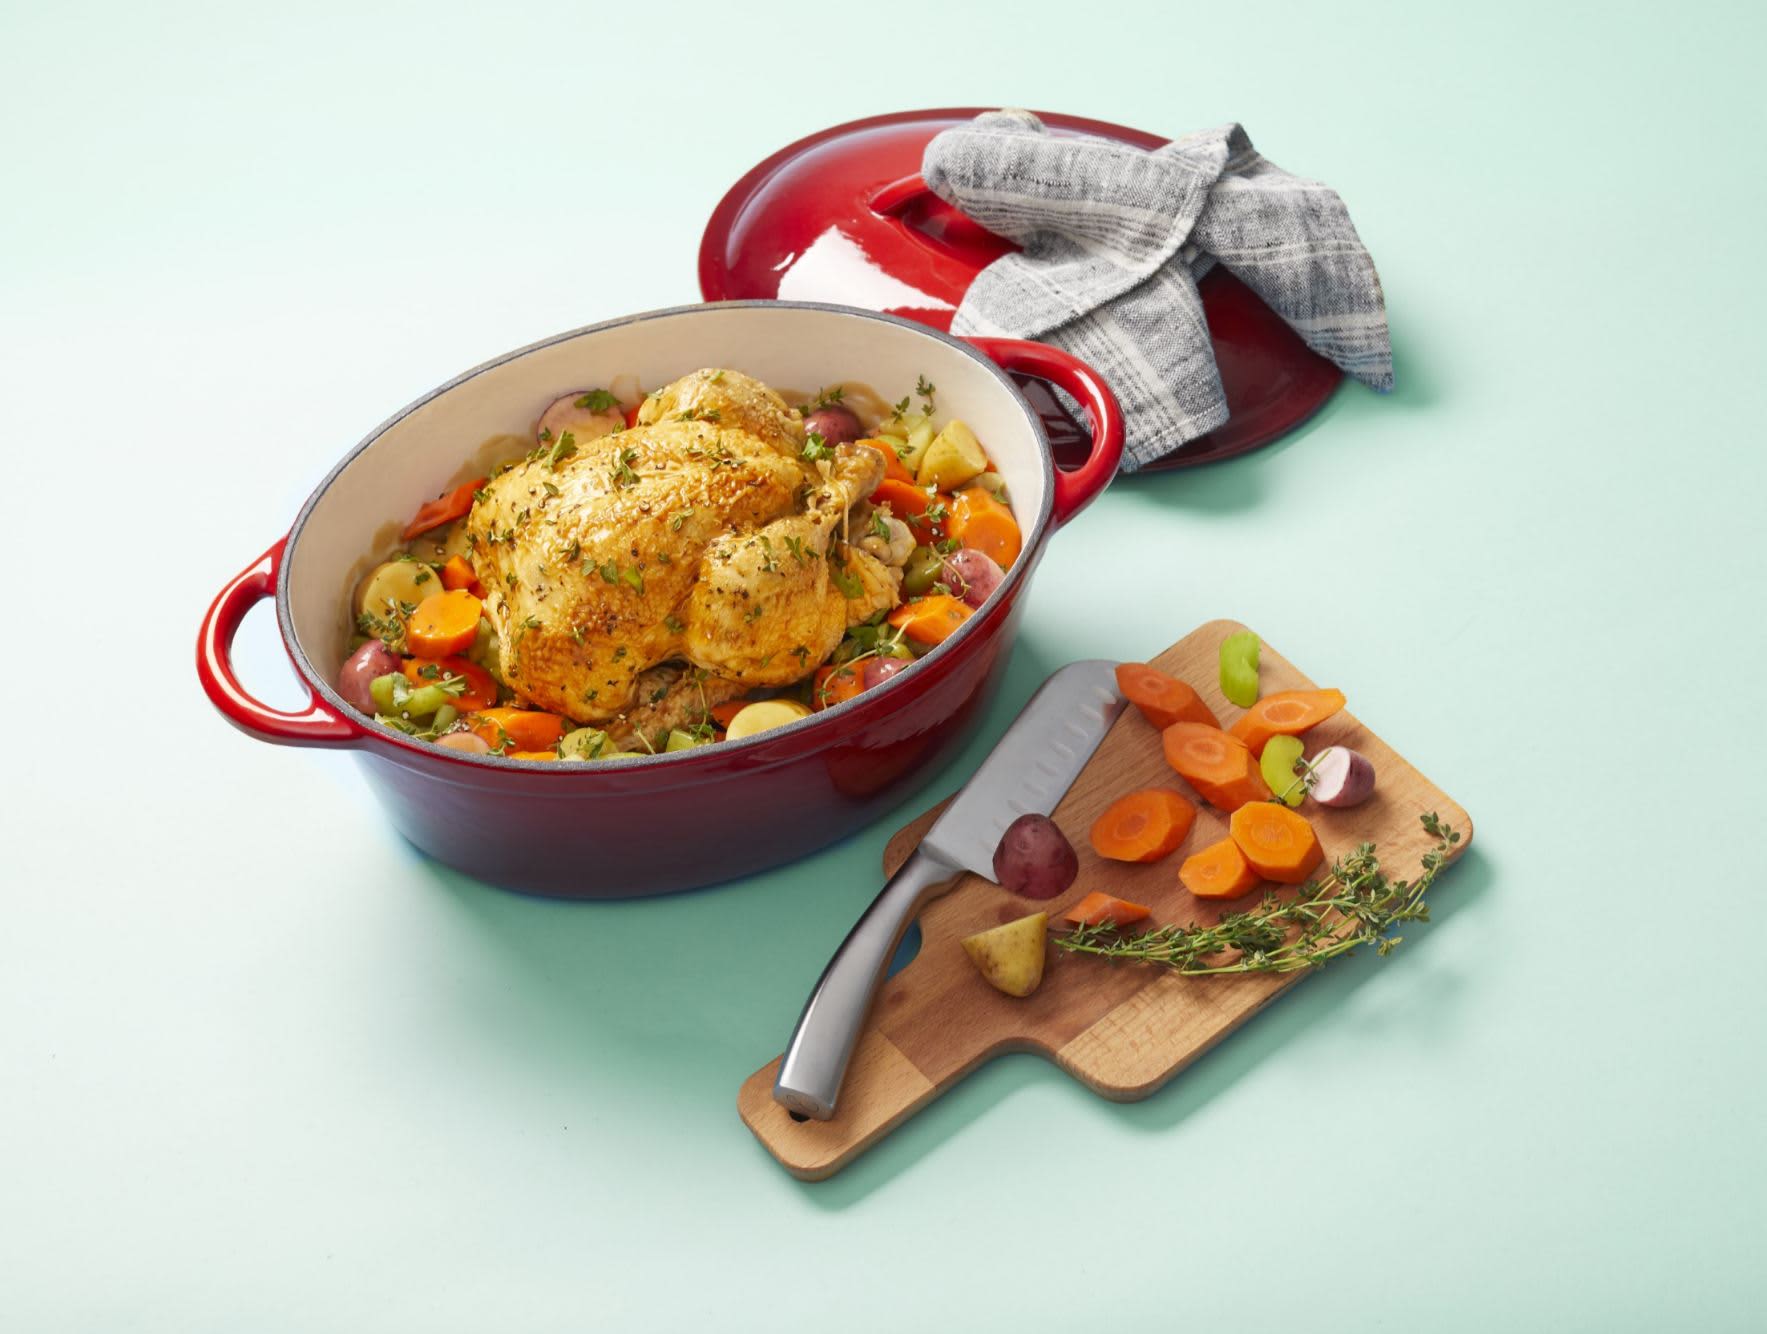 A Popular Lodge Dutch Oven Is on Sale for Just $70 on